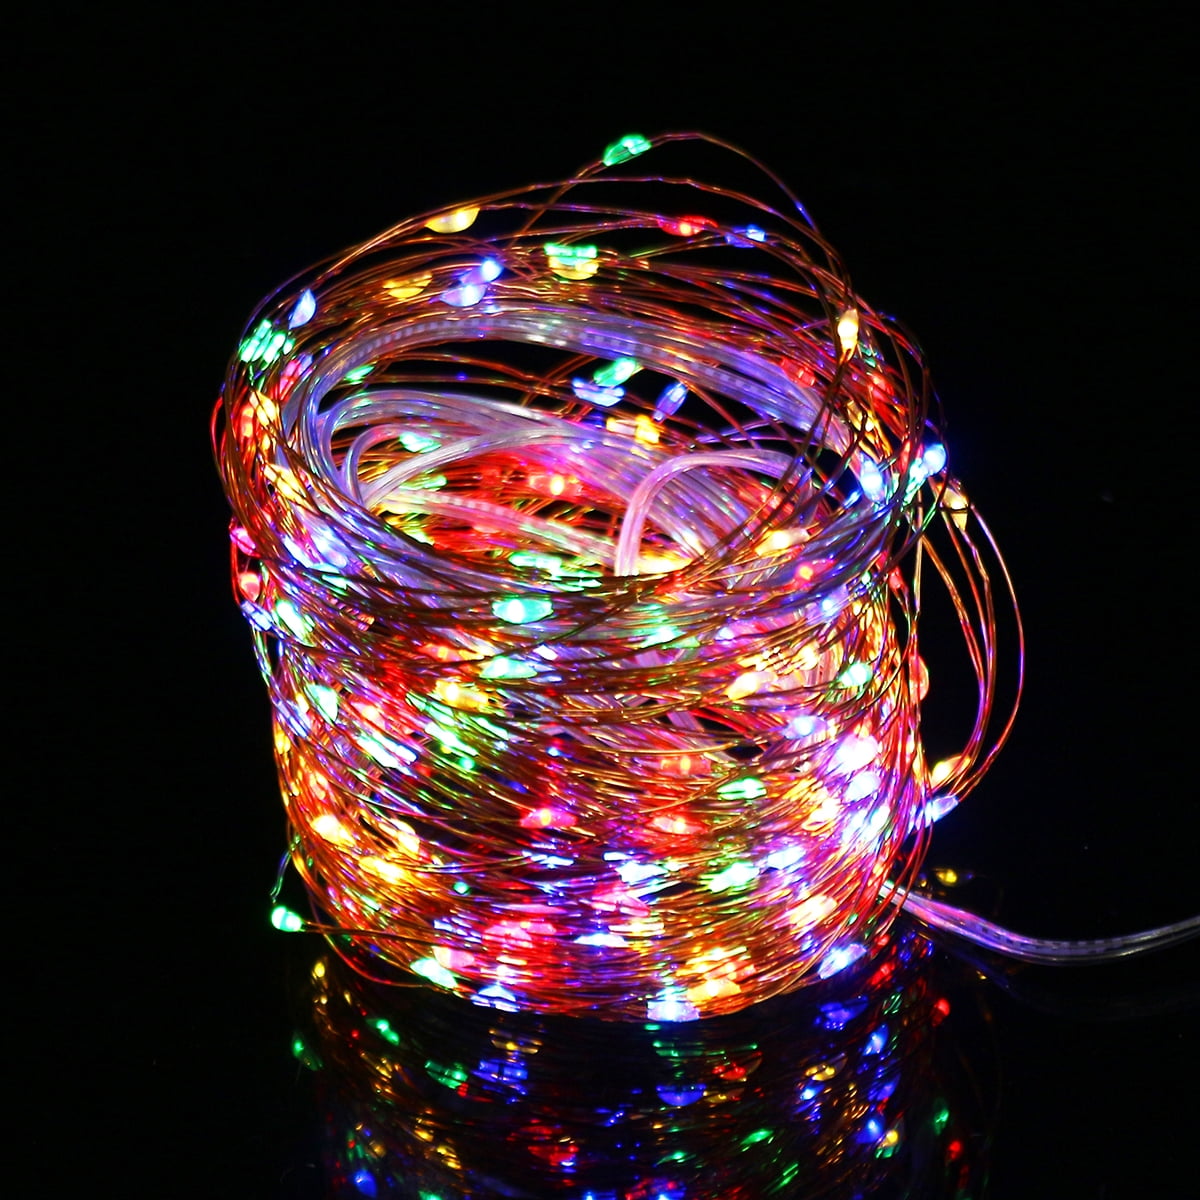 200LED 20M Solar Outdoor String Rope Lights Copper Wire Fairy Party Decor 8Mode